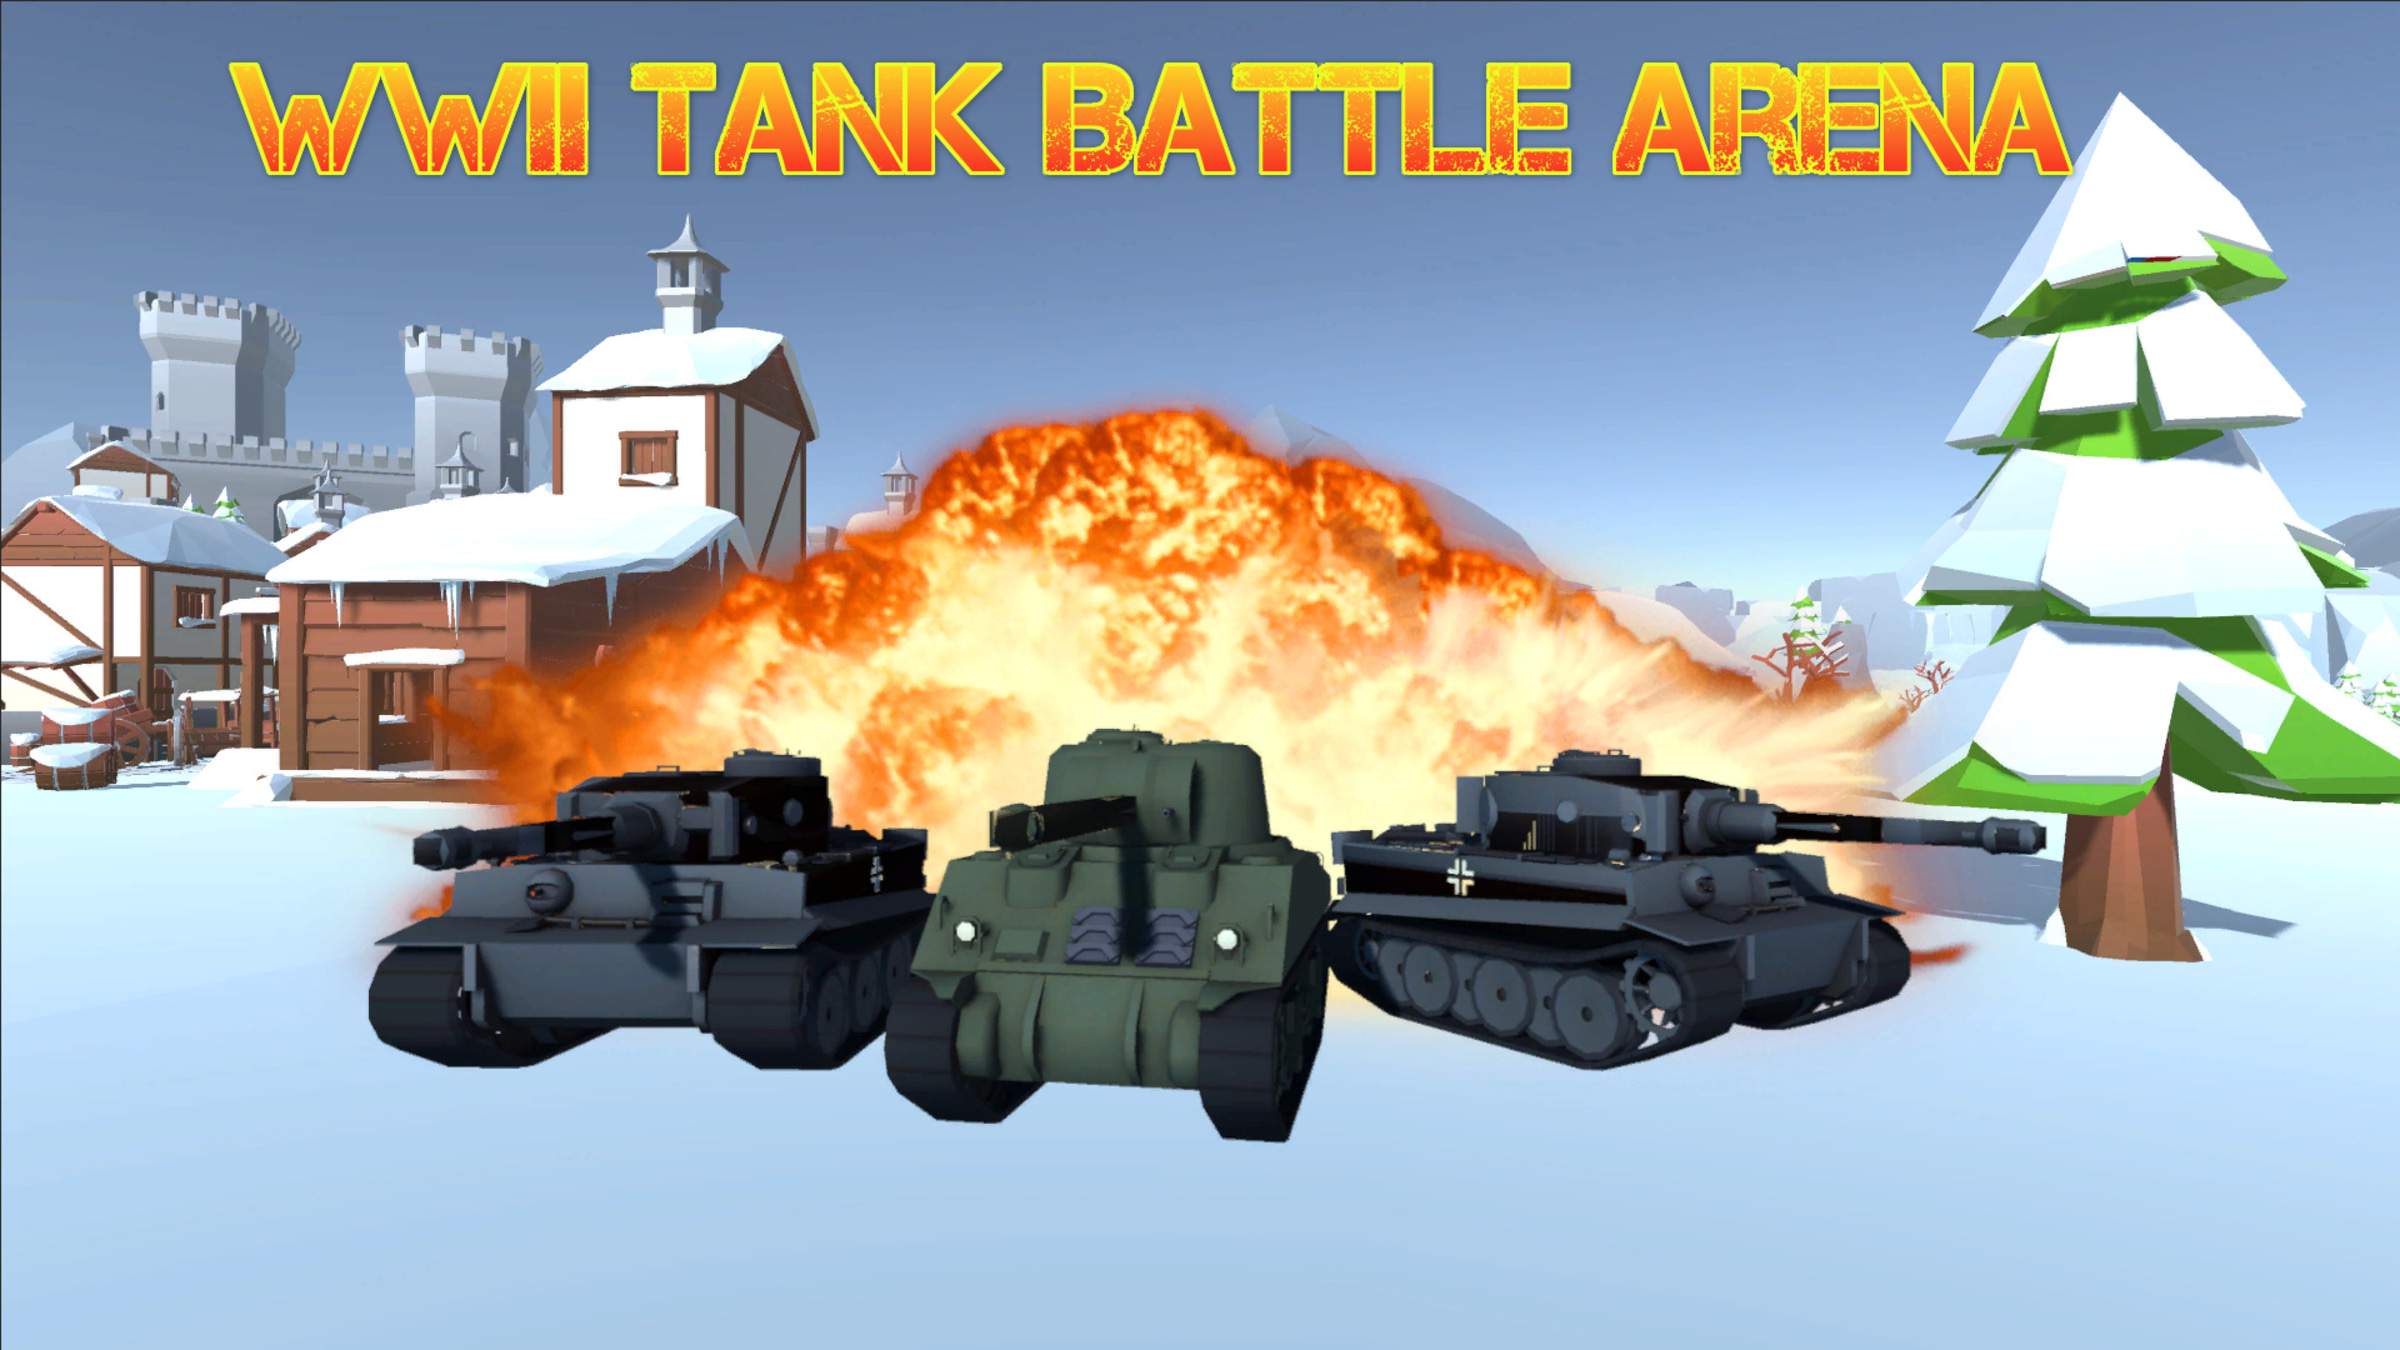 WWII Tank Battle Arena for Nintendo Switch - Nintendo Official Site